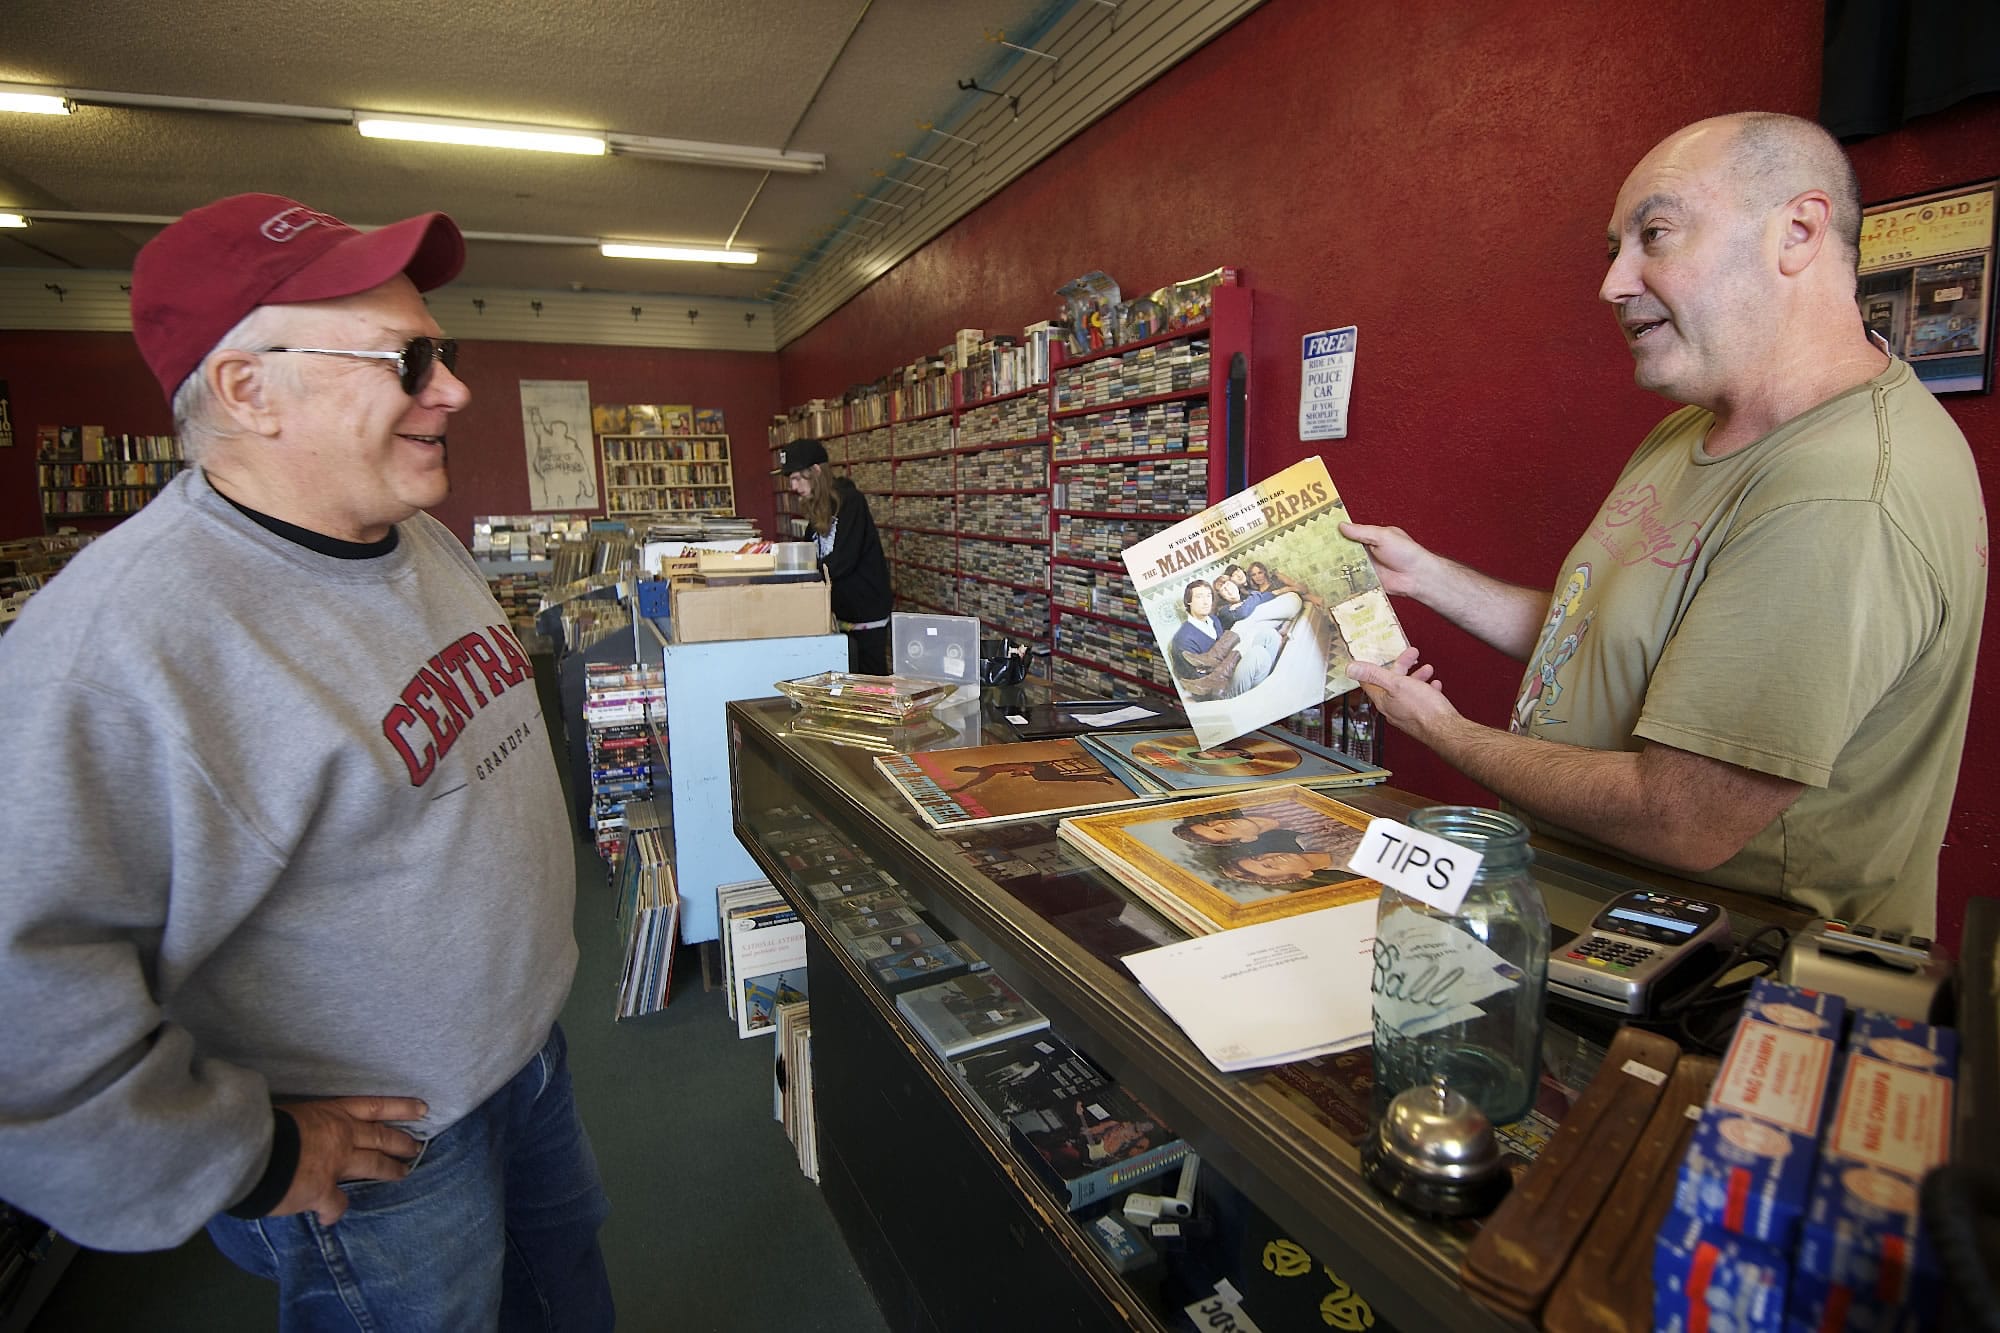 Brian Wassman, right, owner of Everybody's Music, explains the history of a record album's photo cover to customer Chip Bedord at the record store in Uptown Village he opened in 1992.